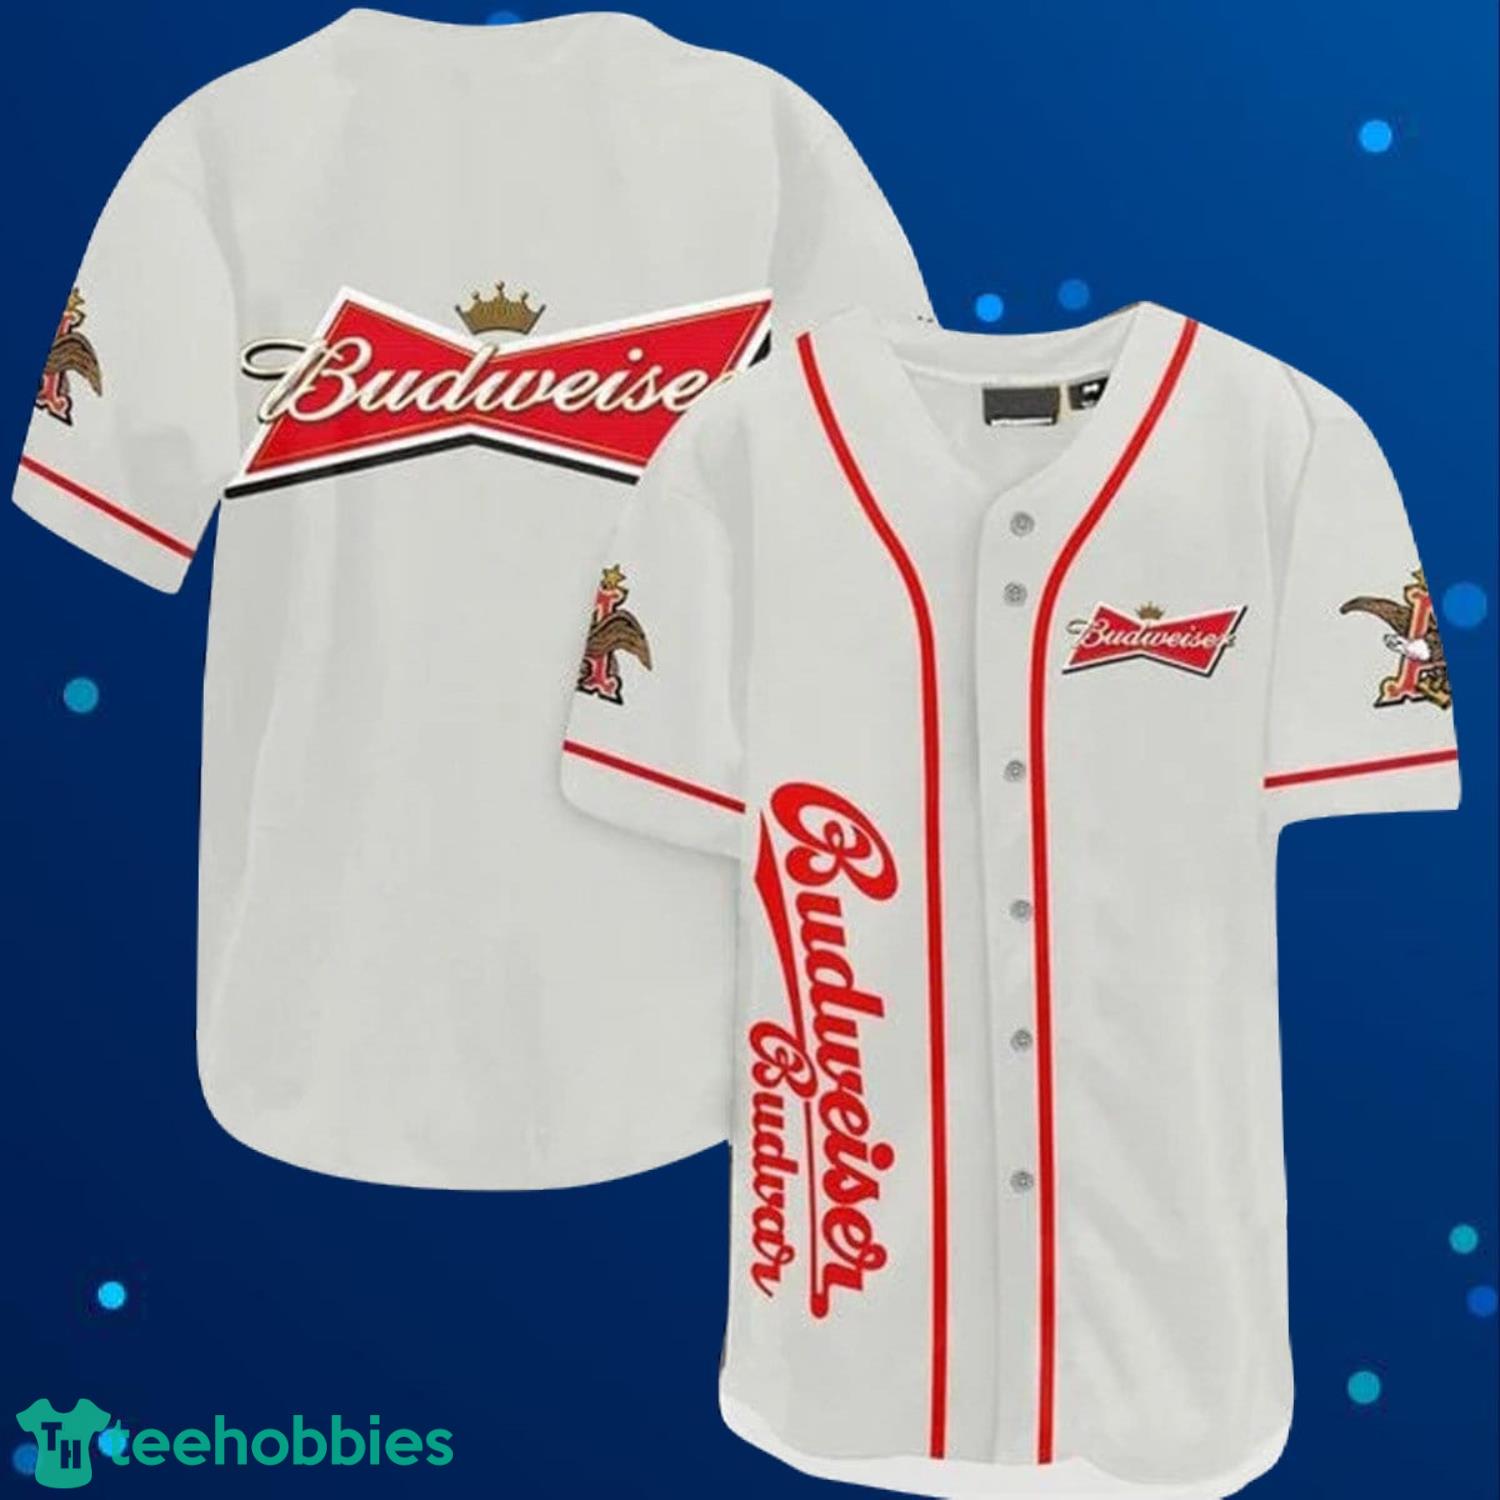 Budweiser Beer Baseball Jersey For Men And Women Product Photo 1